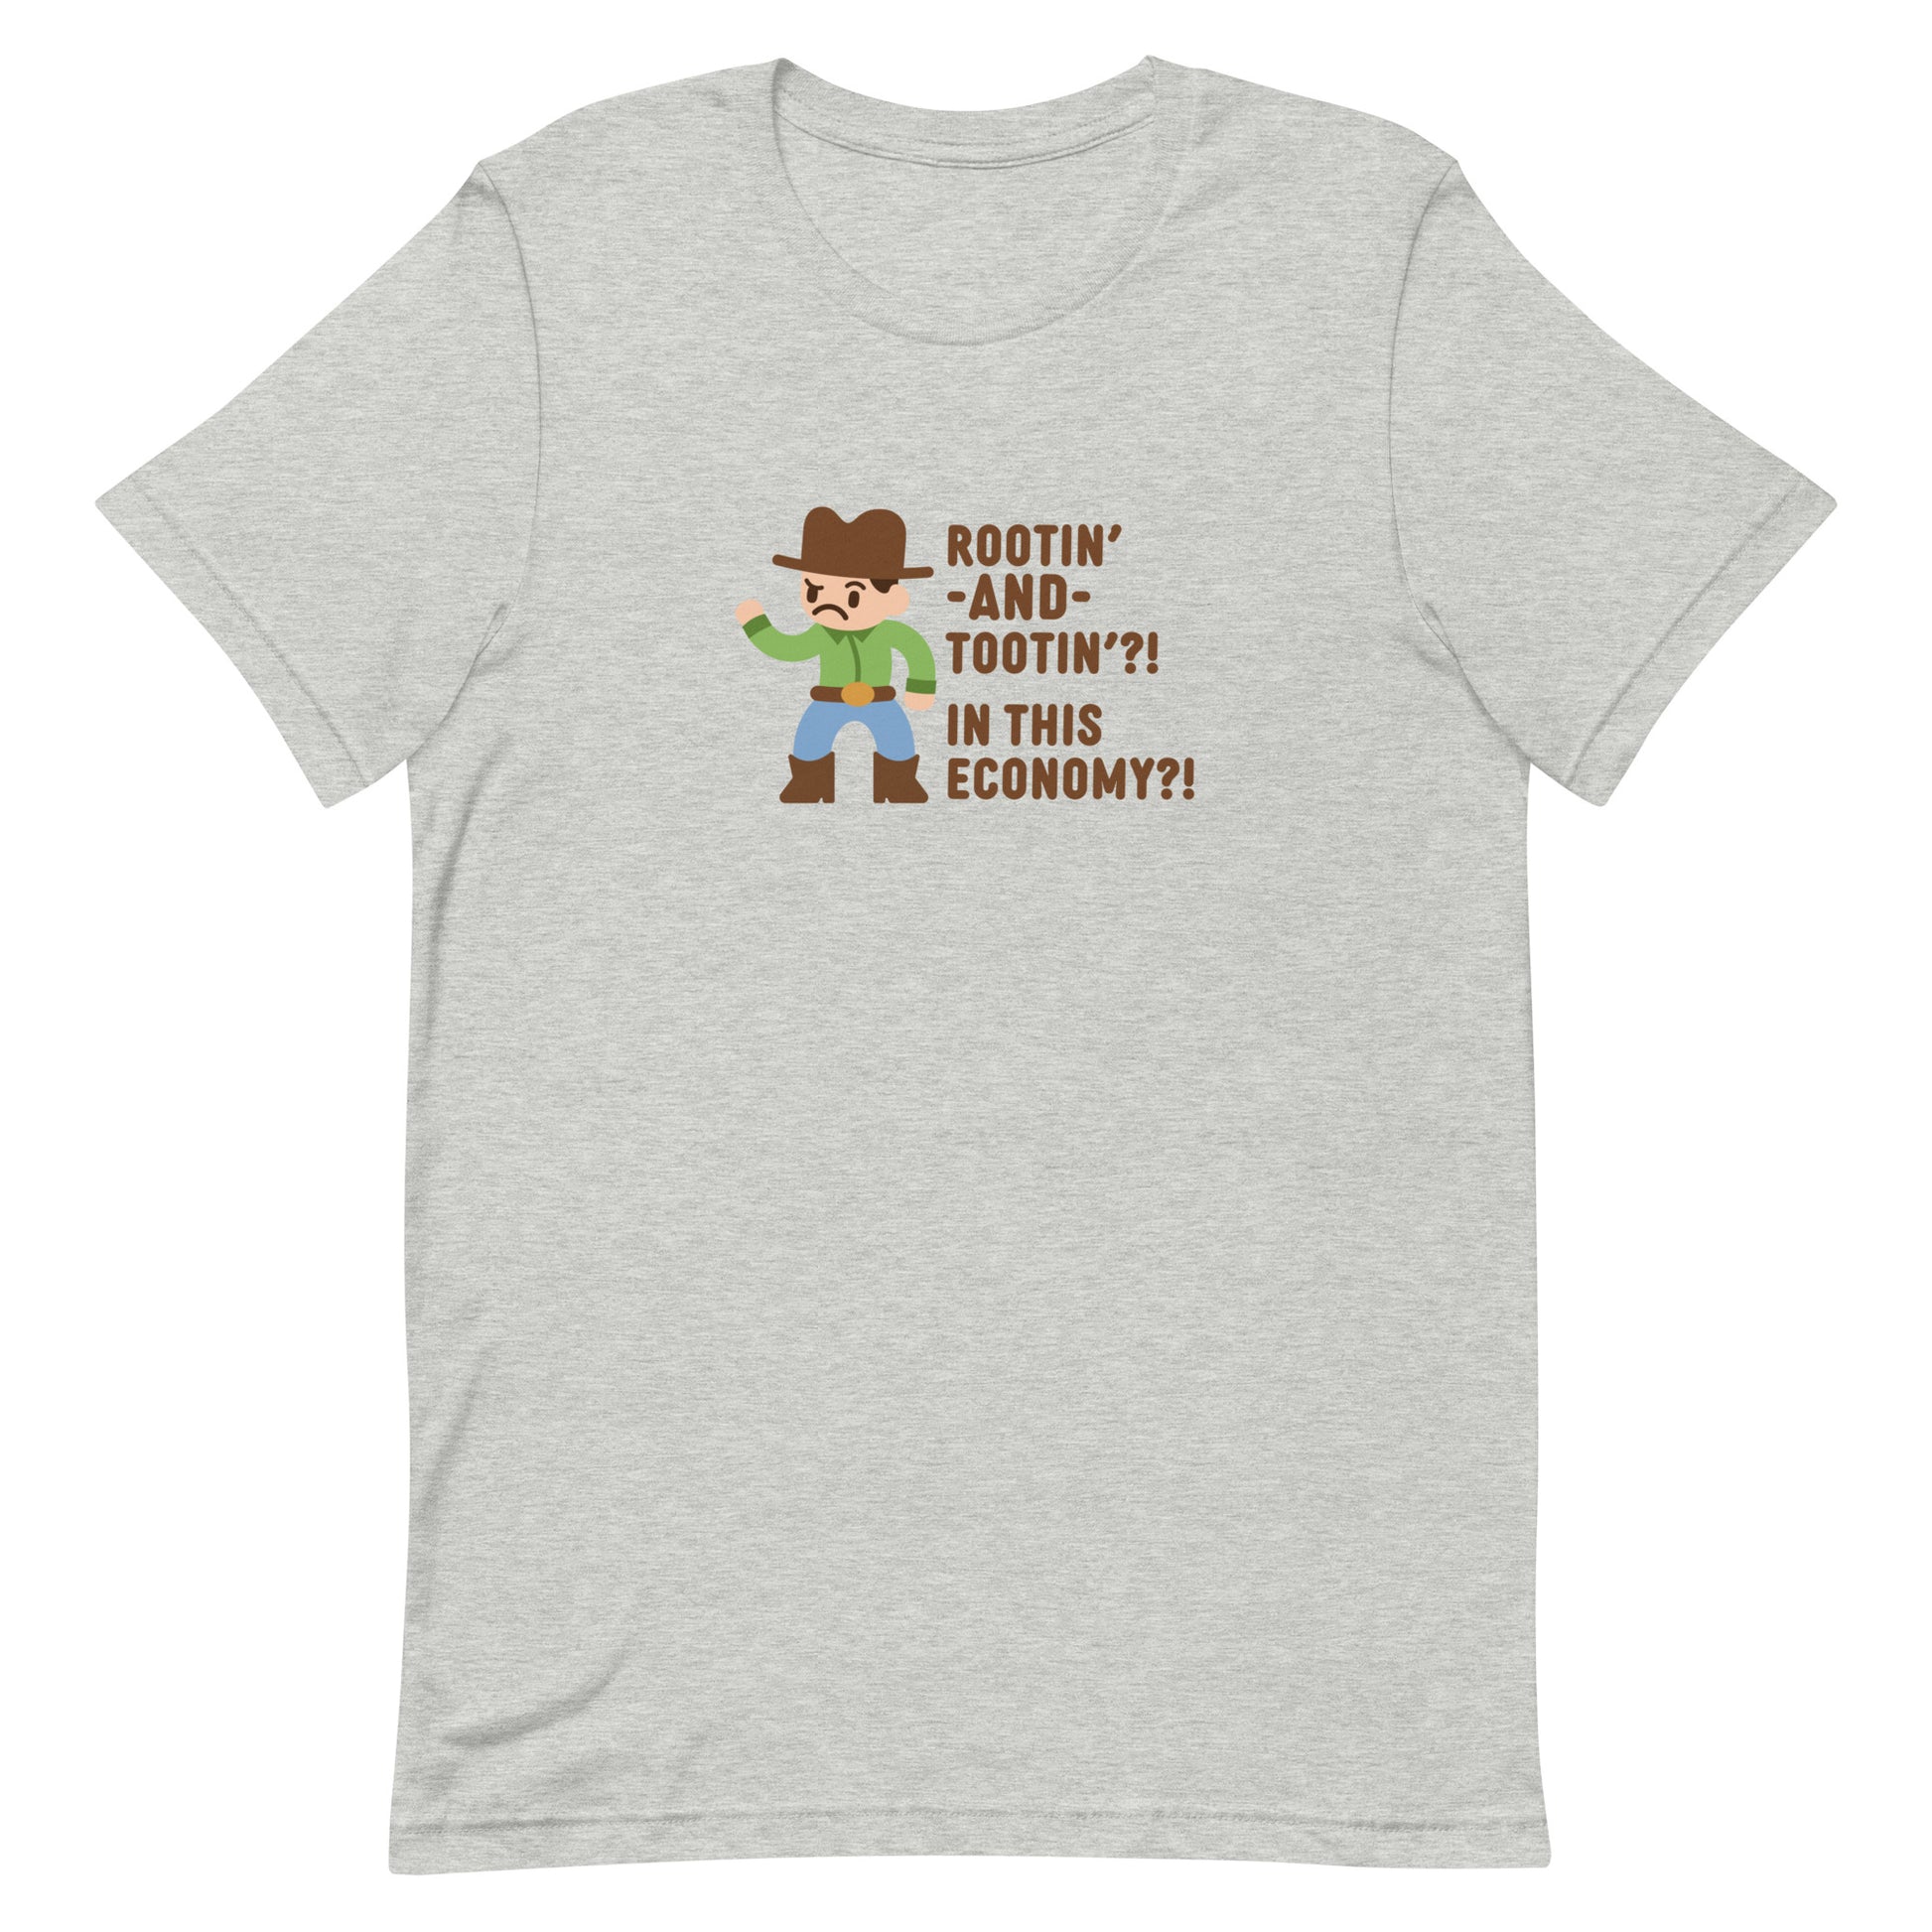 A grey crewneck t-shirt featuring an illustration of a confused-looking cowboy wearing a green shirt. Text to the right of the cowboy reads "Rootin' AND tootin'?! In this economy?!"